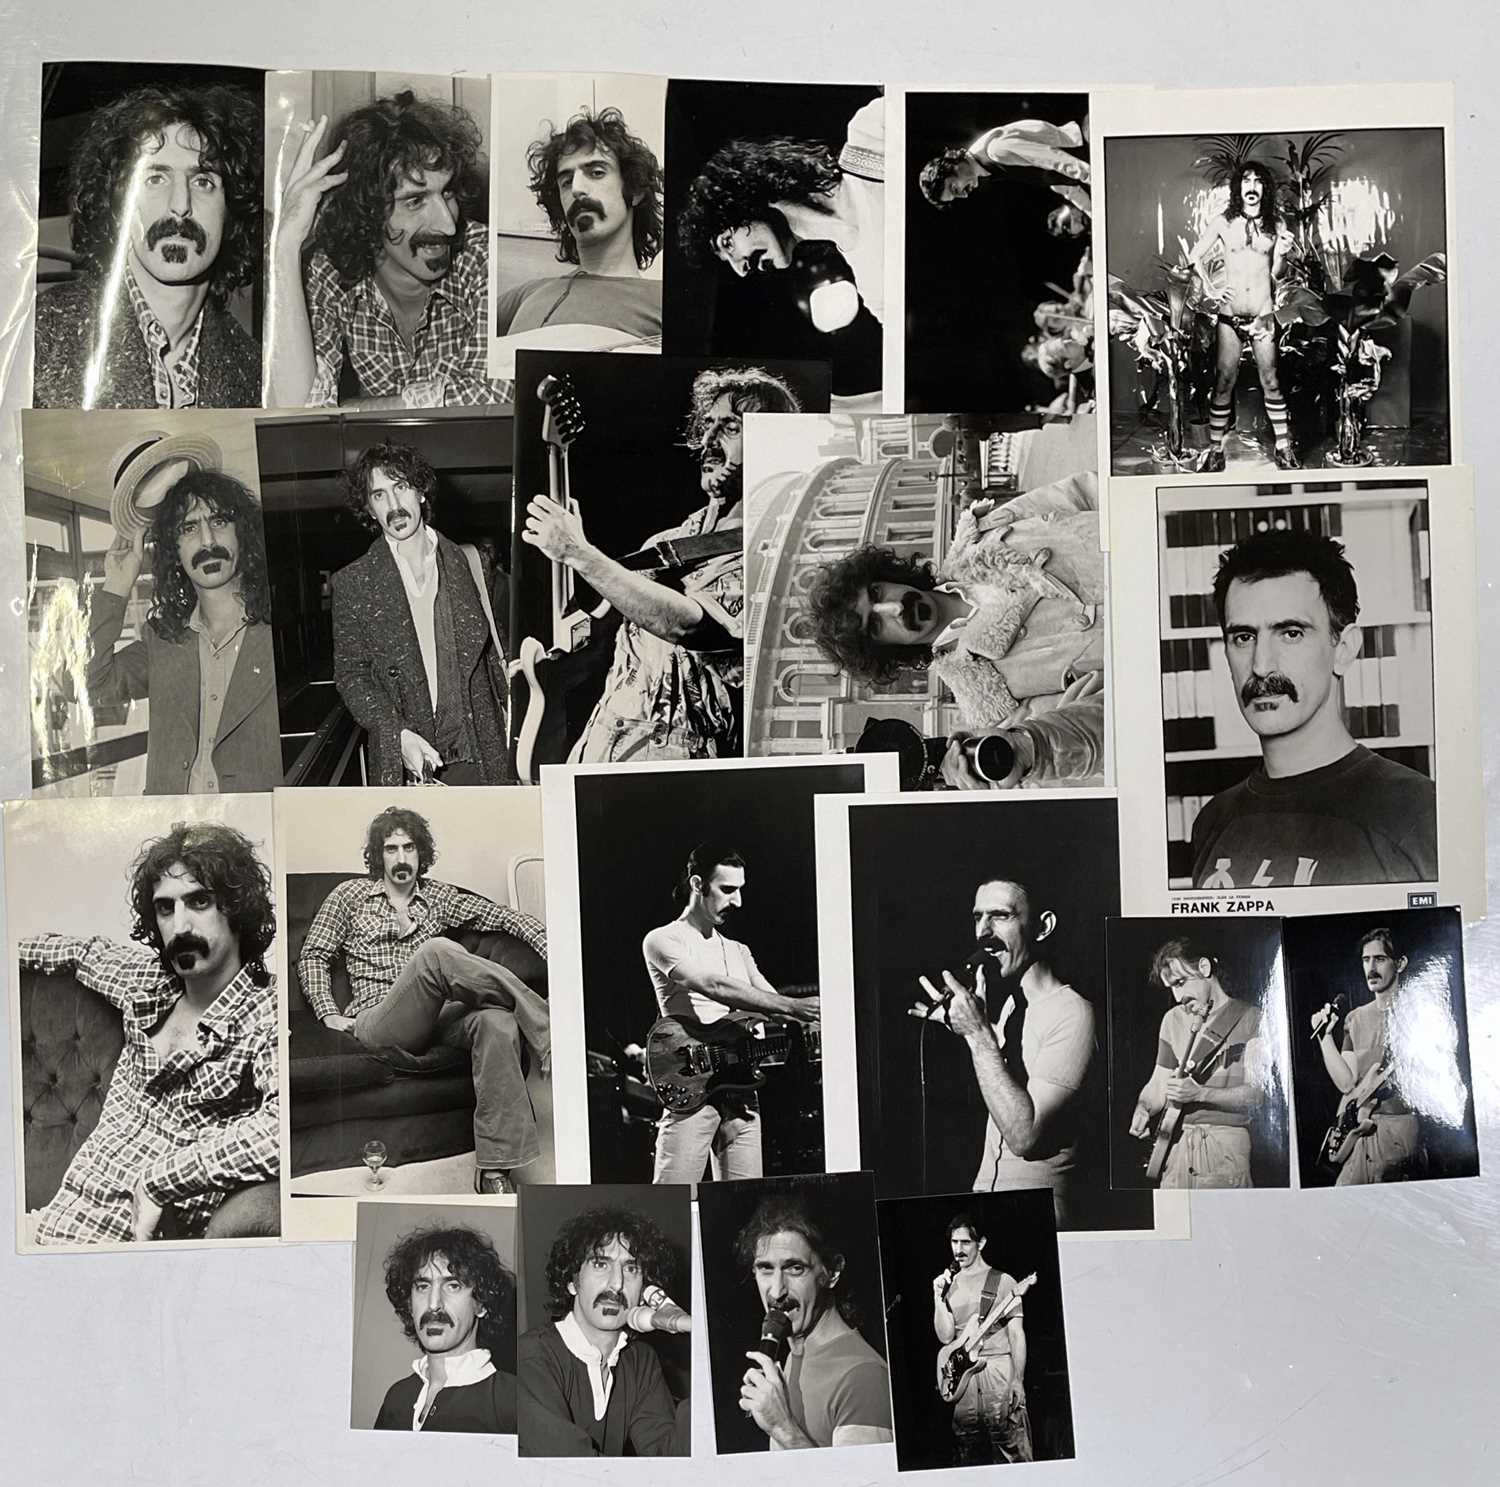 FRANK ZAPPA - COLLECTION OF PRESS PHOTOGRAPHS.